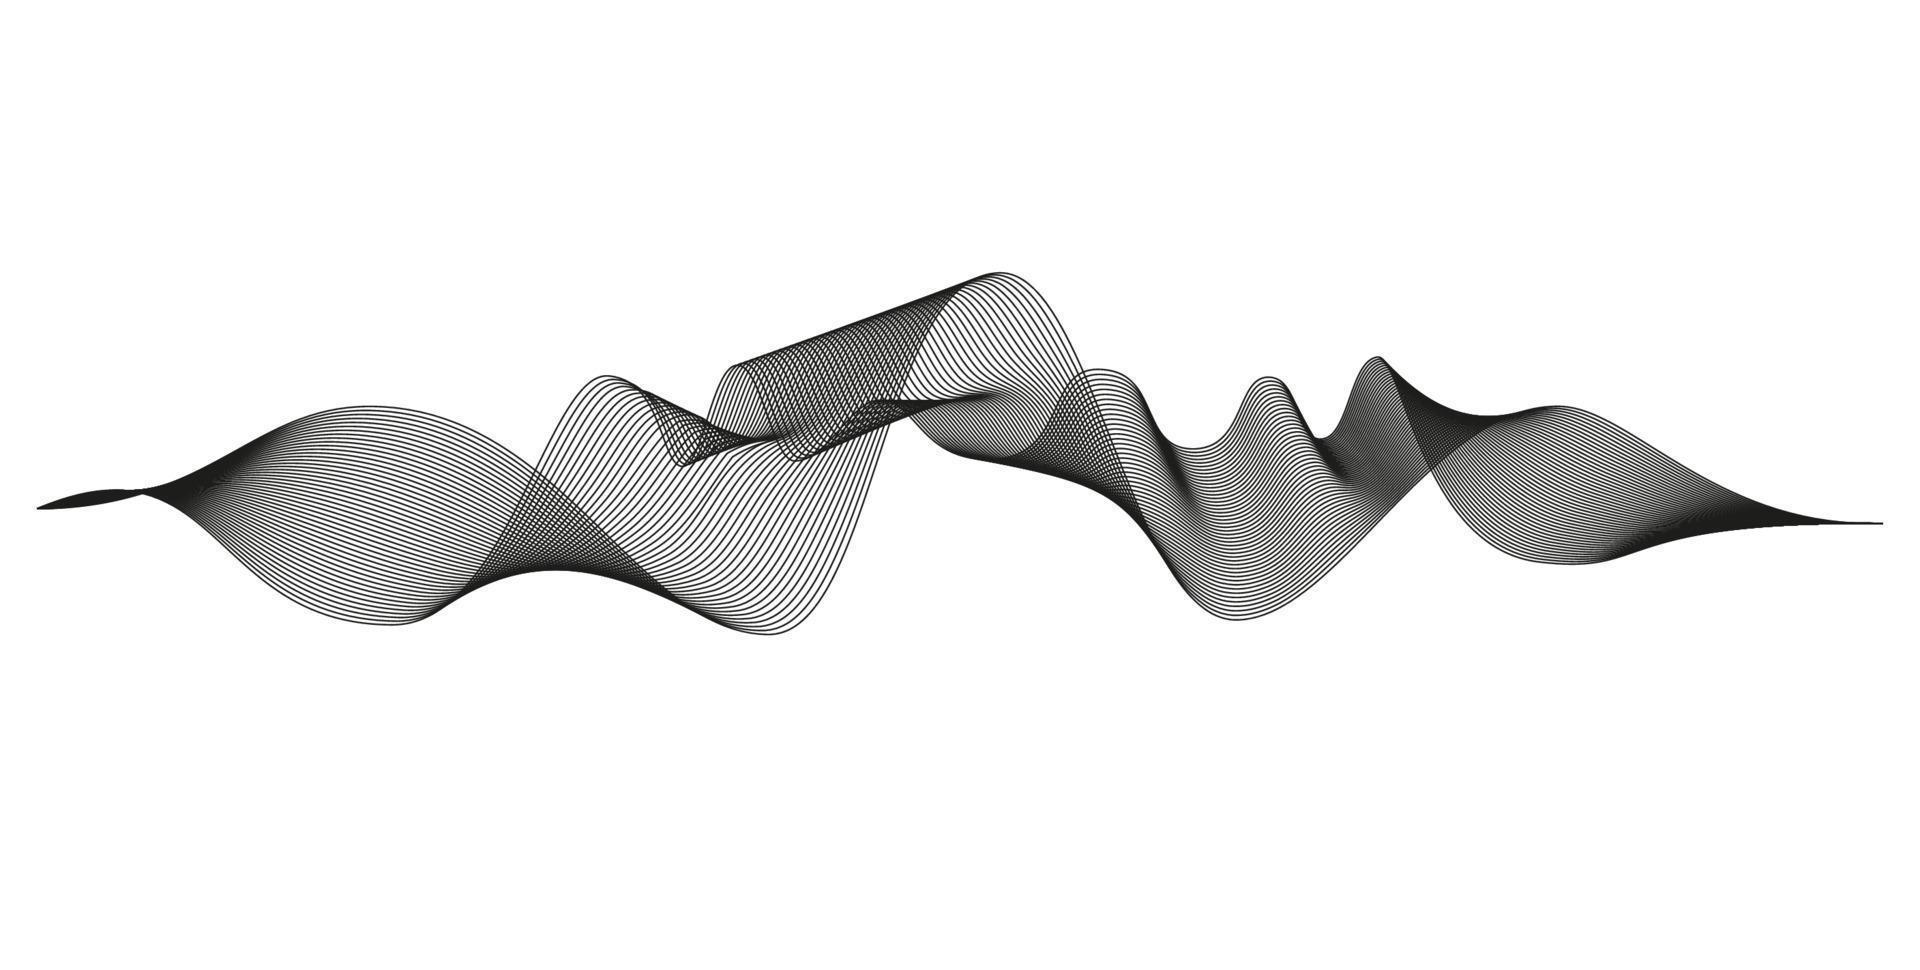 Wavy abstract stripes. Curved line vector elements for music design. Digital sound equalizer.